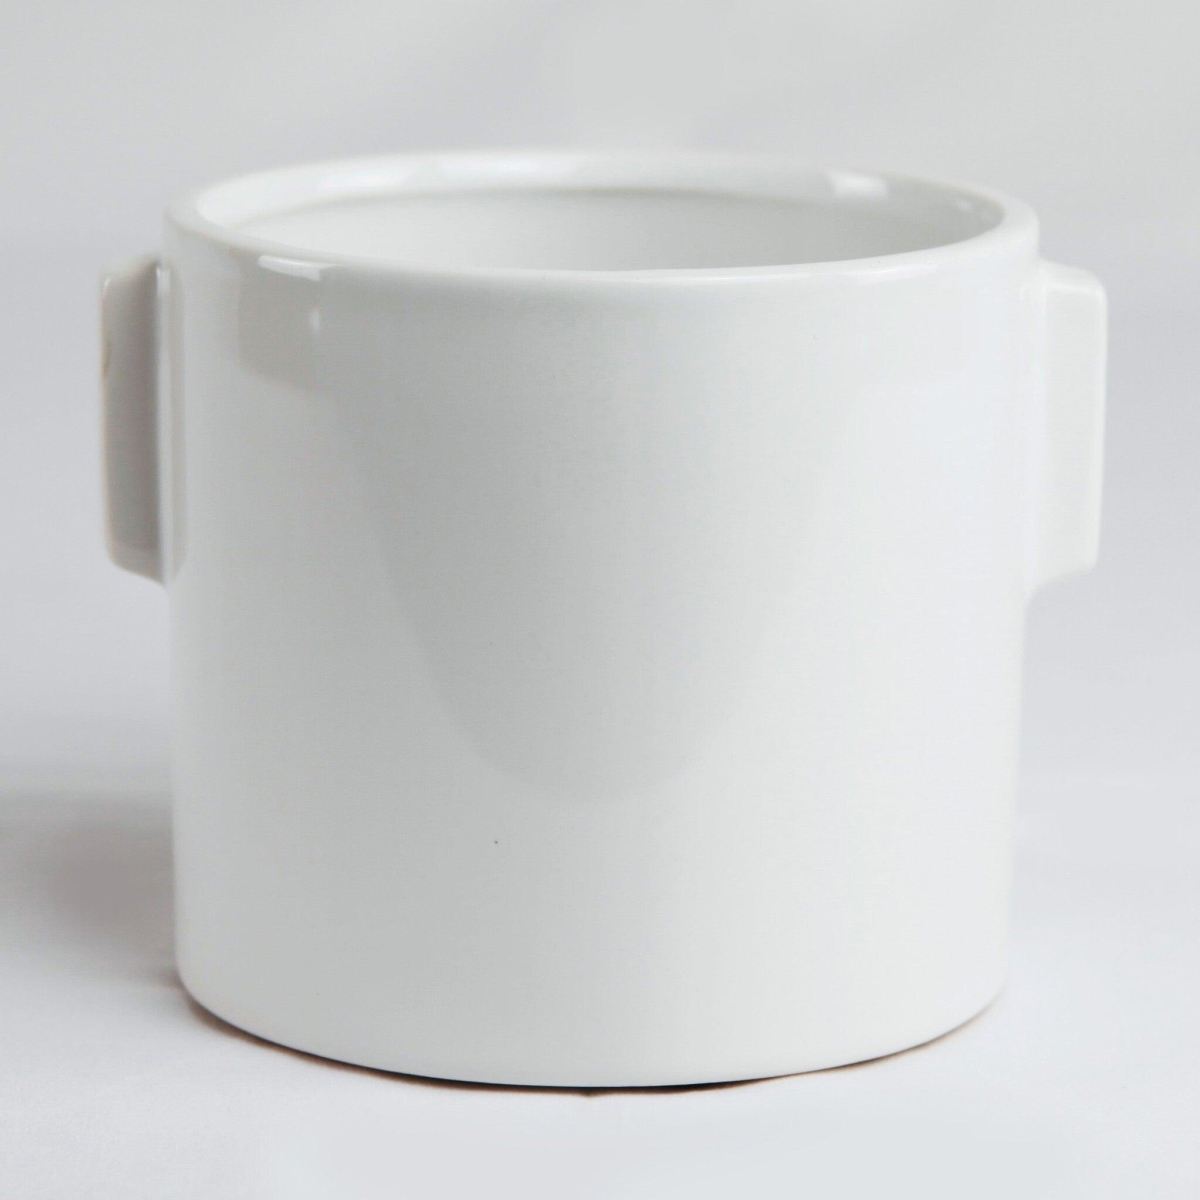 MDR Trading AI-CE10-155-Q02 6 in. Pot Size White with Ear Handles Planter - Set of 2